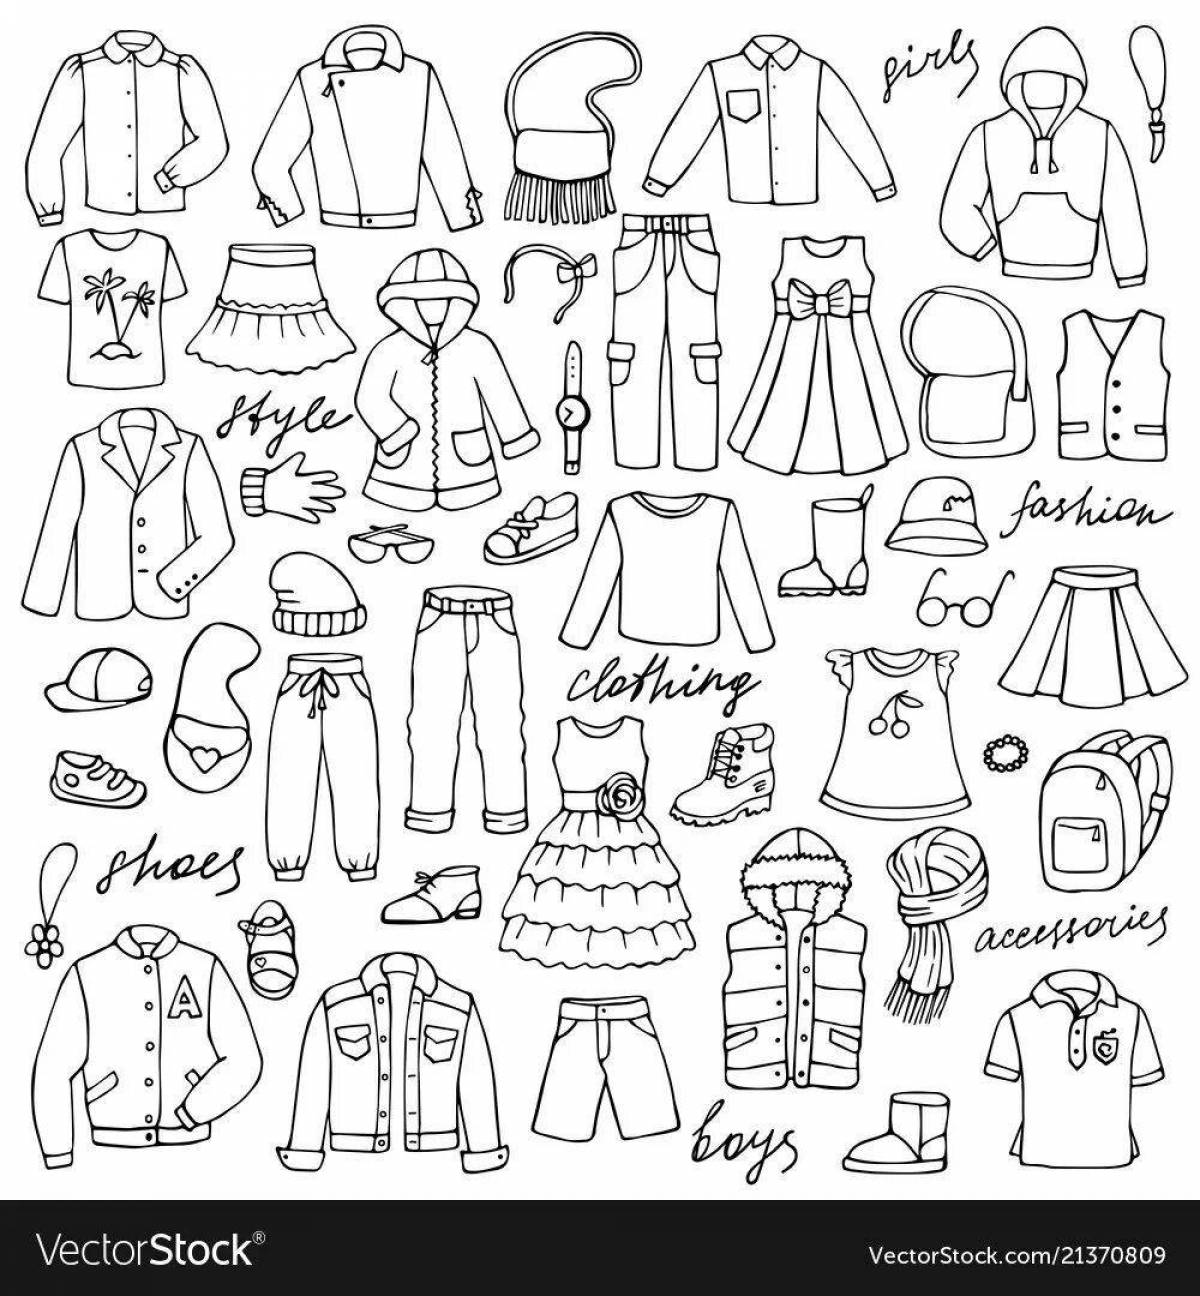 Intricate clothing coloring page